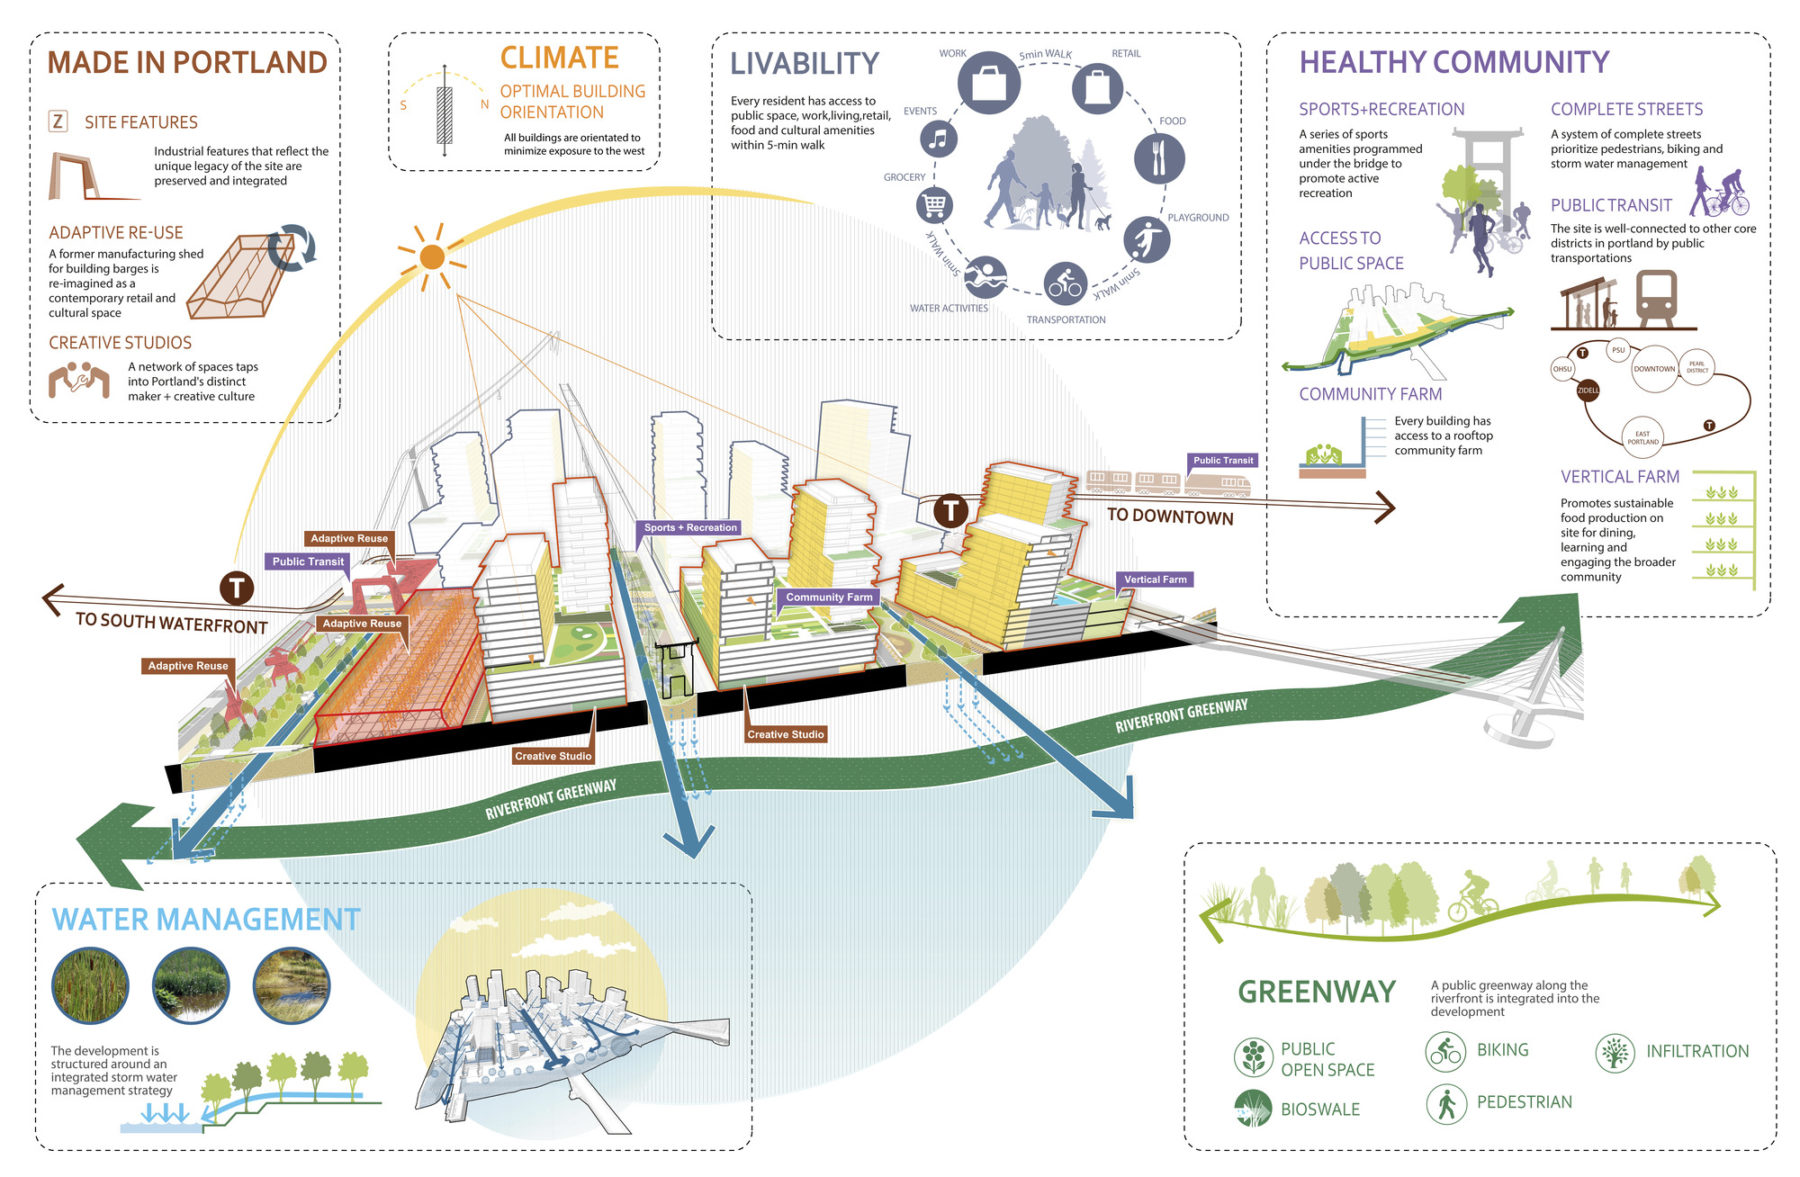 Diagram detailing high-level climate, livability, health, greenway, water management, and made in Portland features of the plan